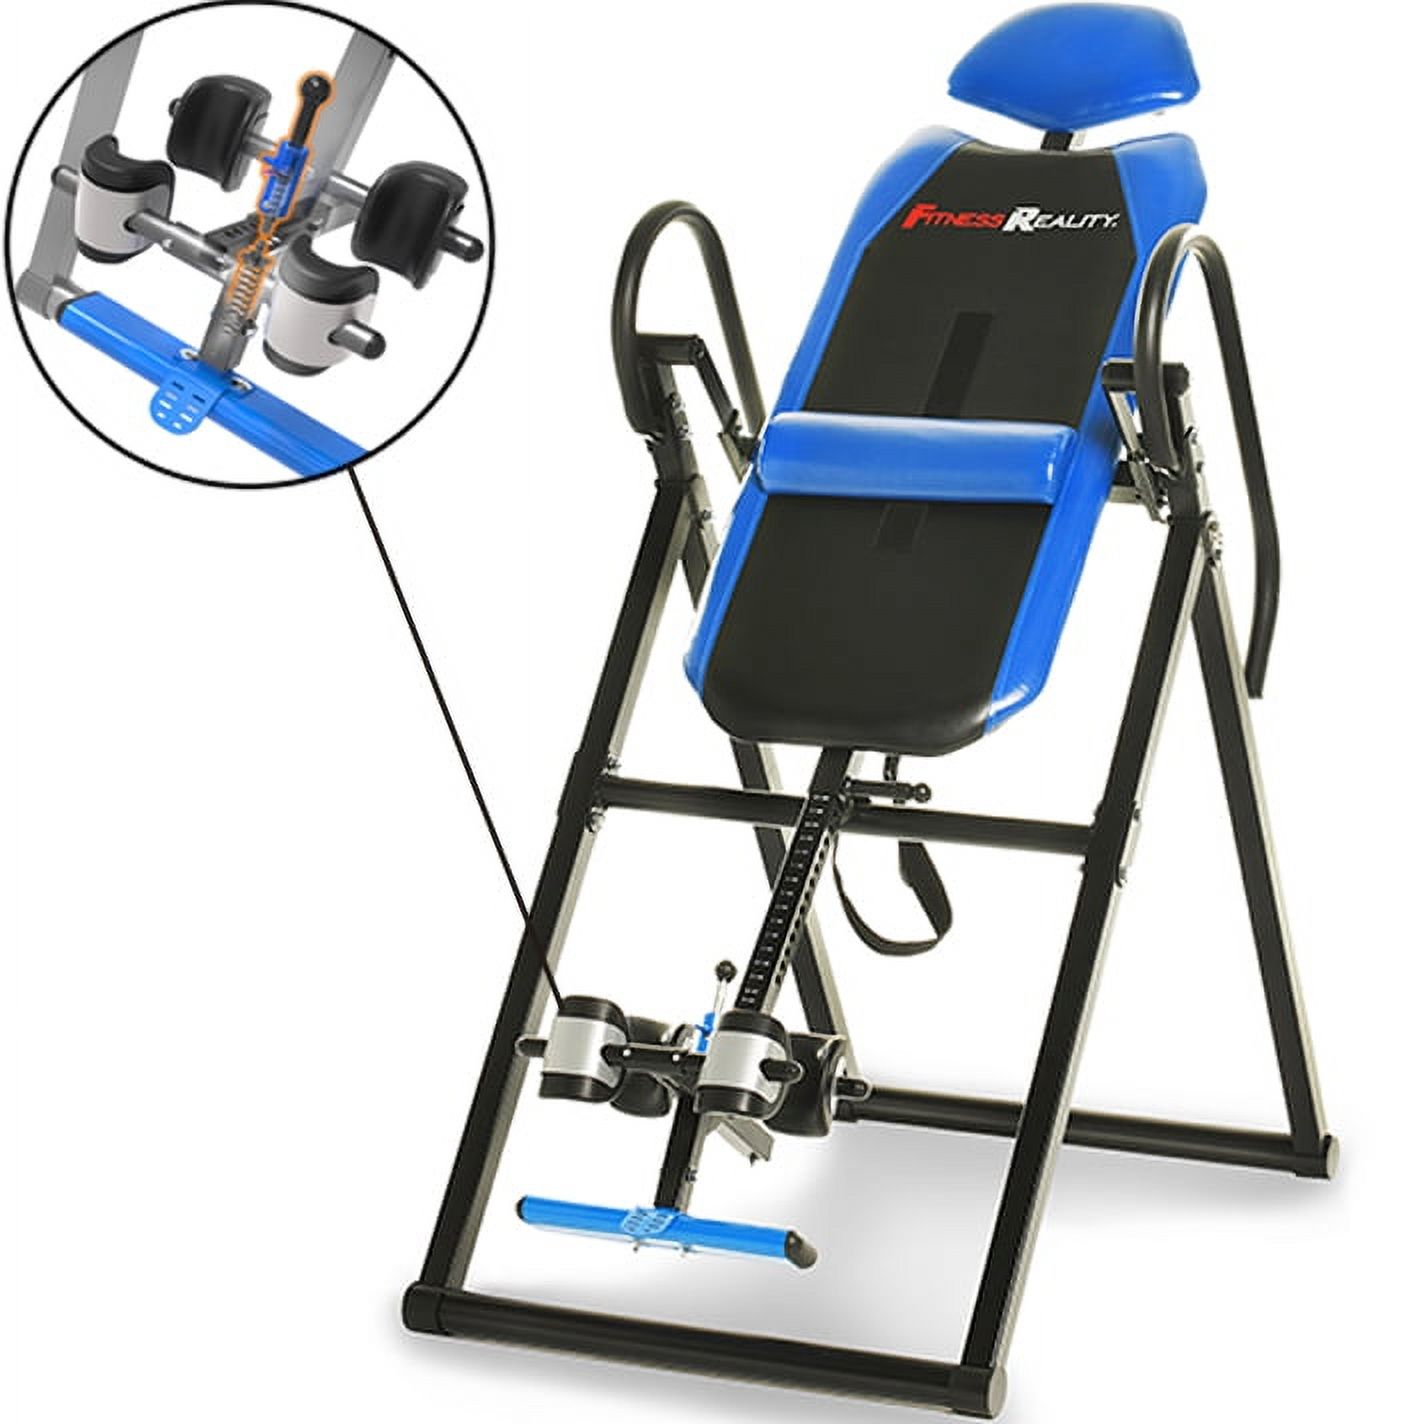 Fitness Reality 690XL Triple Safety Locking Inversion Table with Lumbar Pillow - image 1 of 8